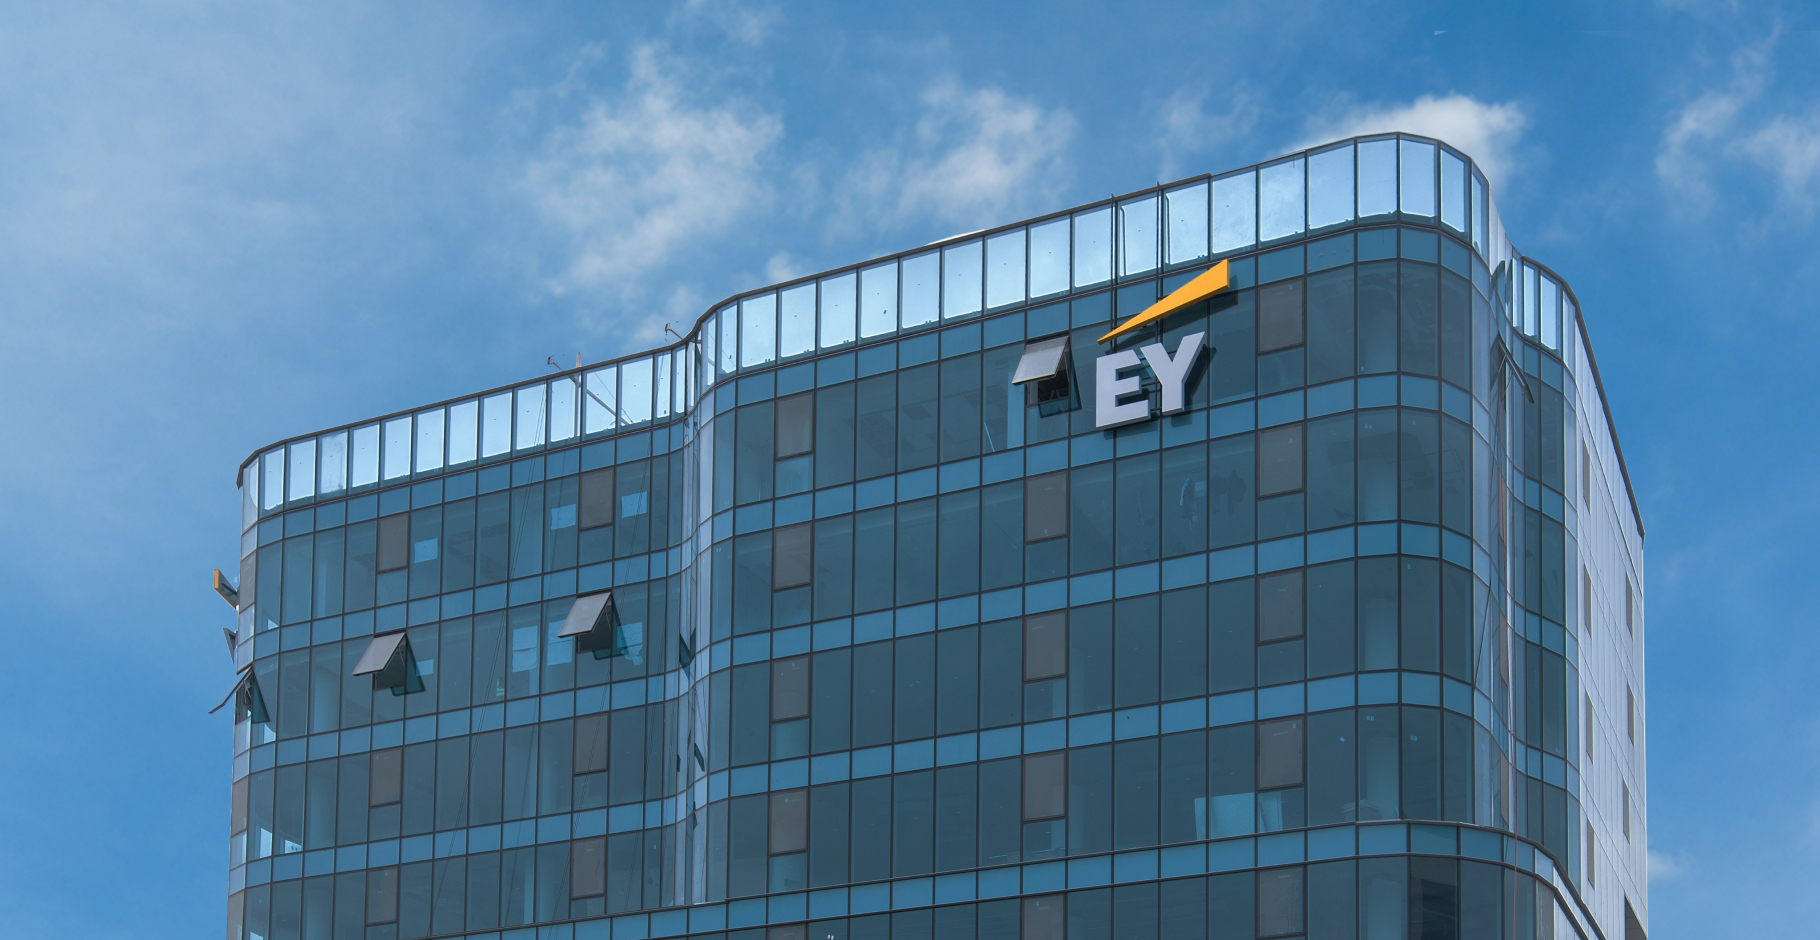 ERNEST & YOUNG (EY) OFFICE BUILDING – GHANA